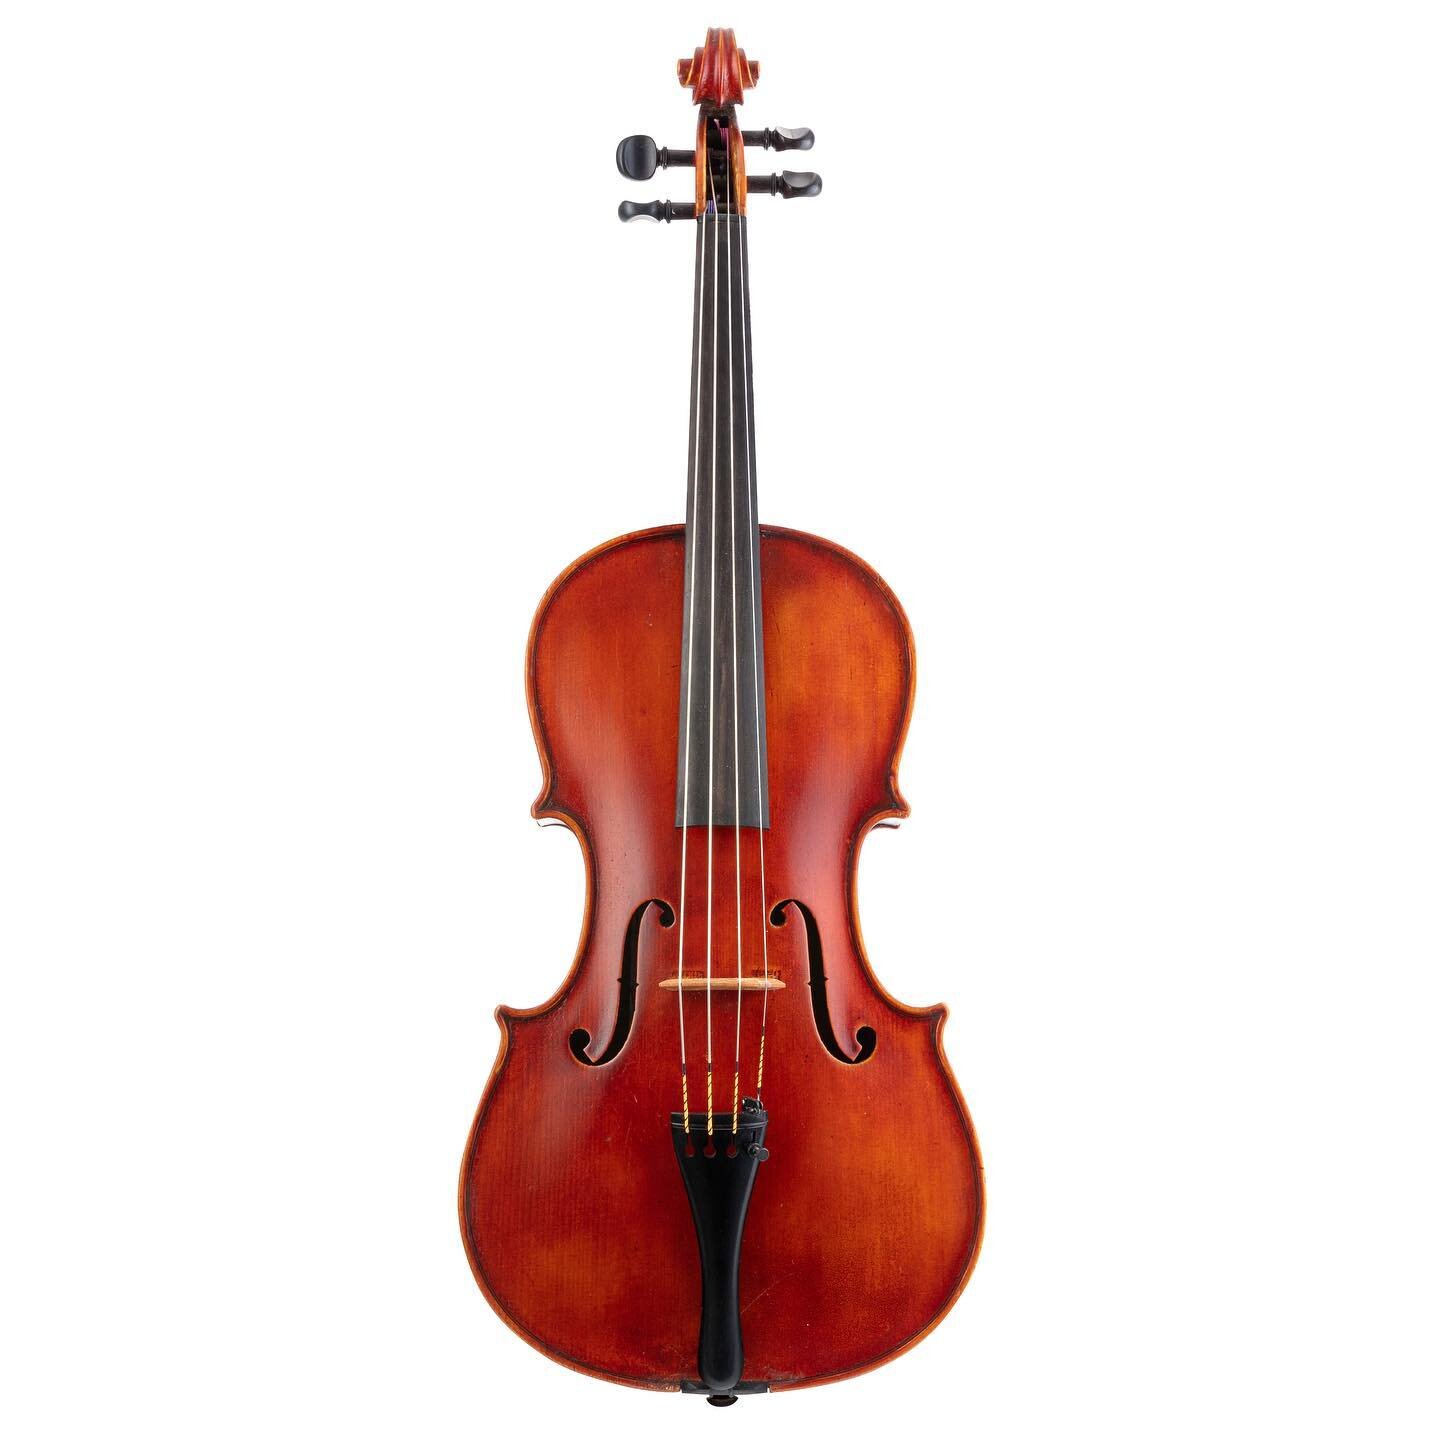 An Italian viola now available at the Ruschil &amp; Bailly workshop. 

Made by Armando Giulietti (1903 - 1990) in Milan 1937, this Italian viola is in excellent condition and conforms to classic proportions, measuring 15 15/16&rdquo; with a neck and 